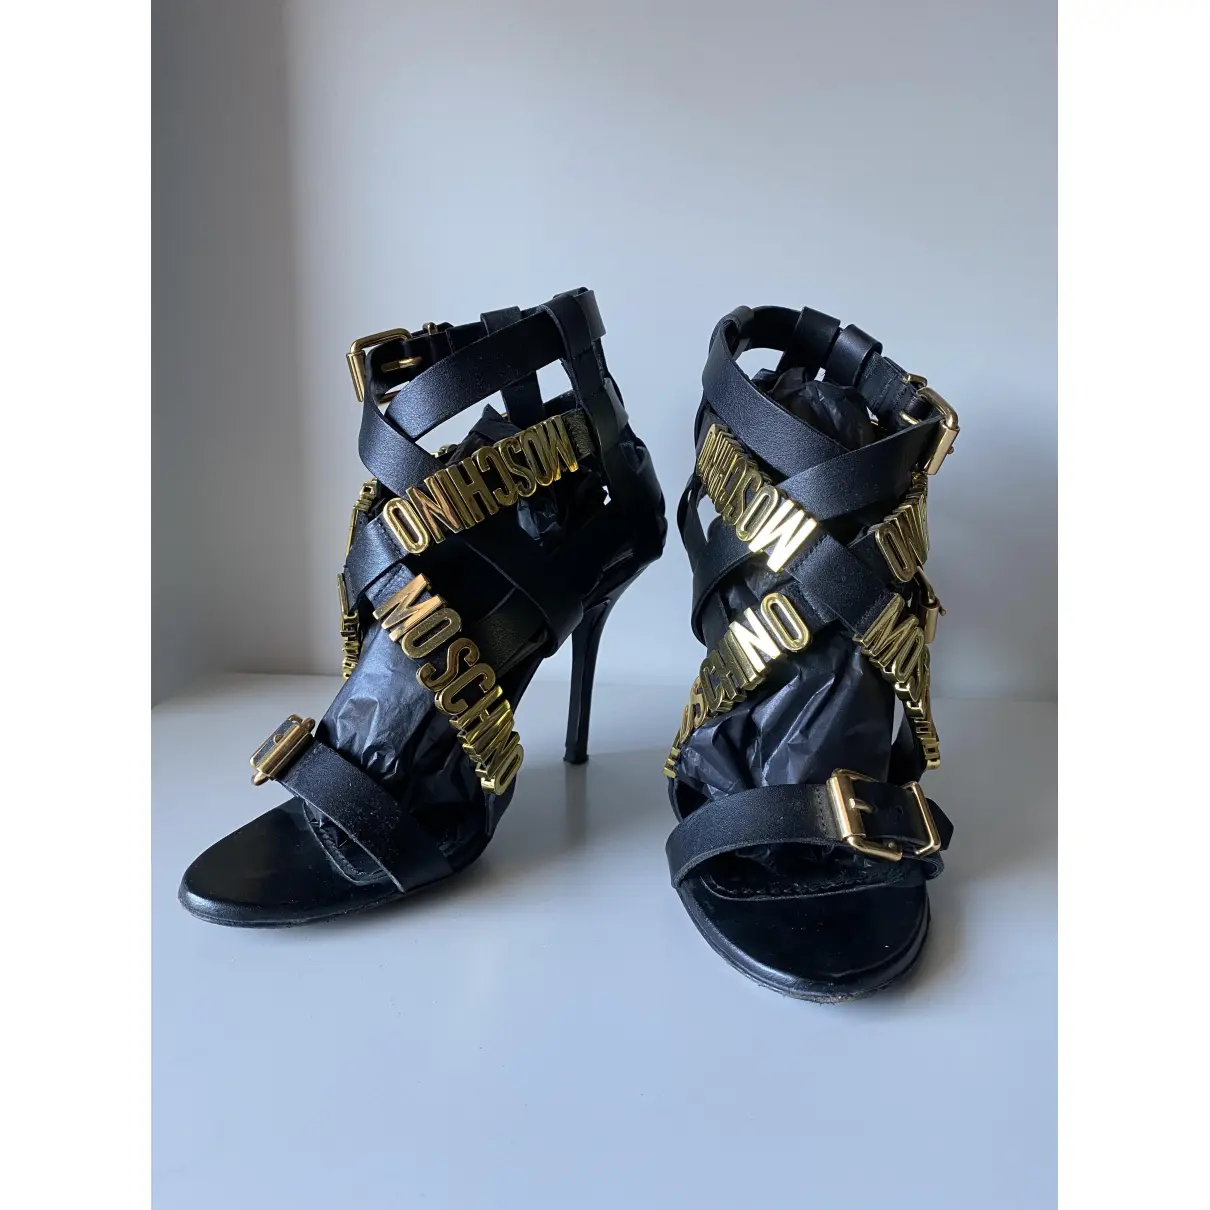 Buy Moschino Leather sandal online